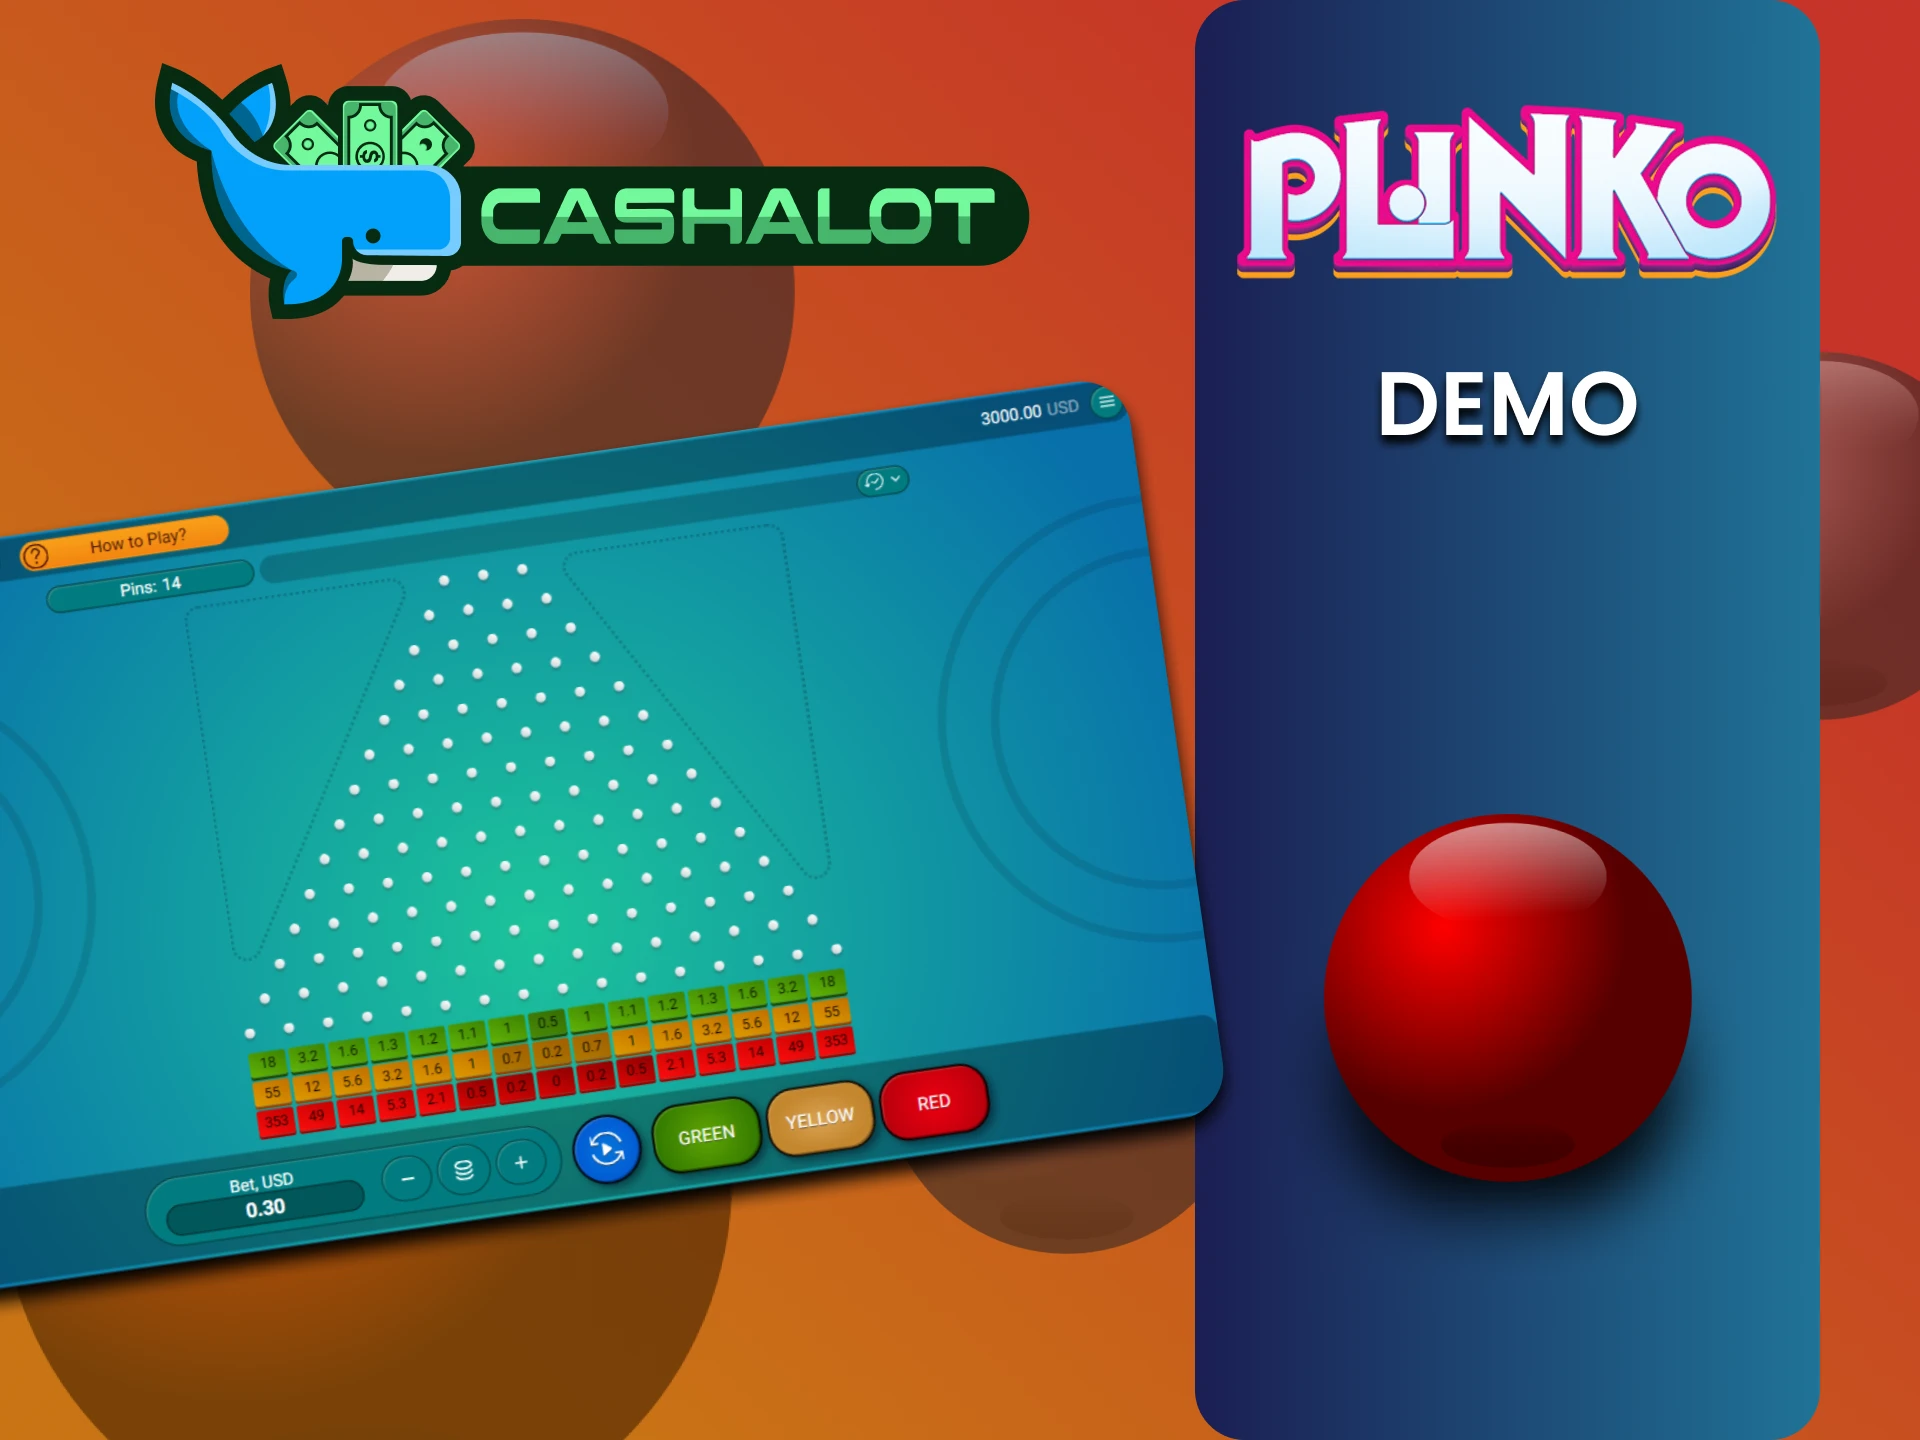 Practice with a demo version of the Plinko game on the Cashalot website.